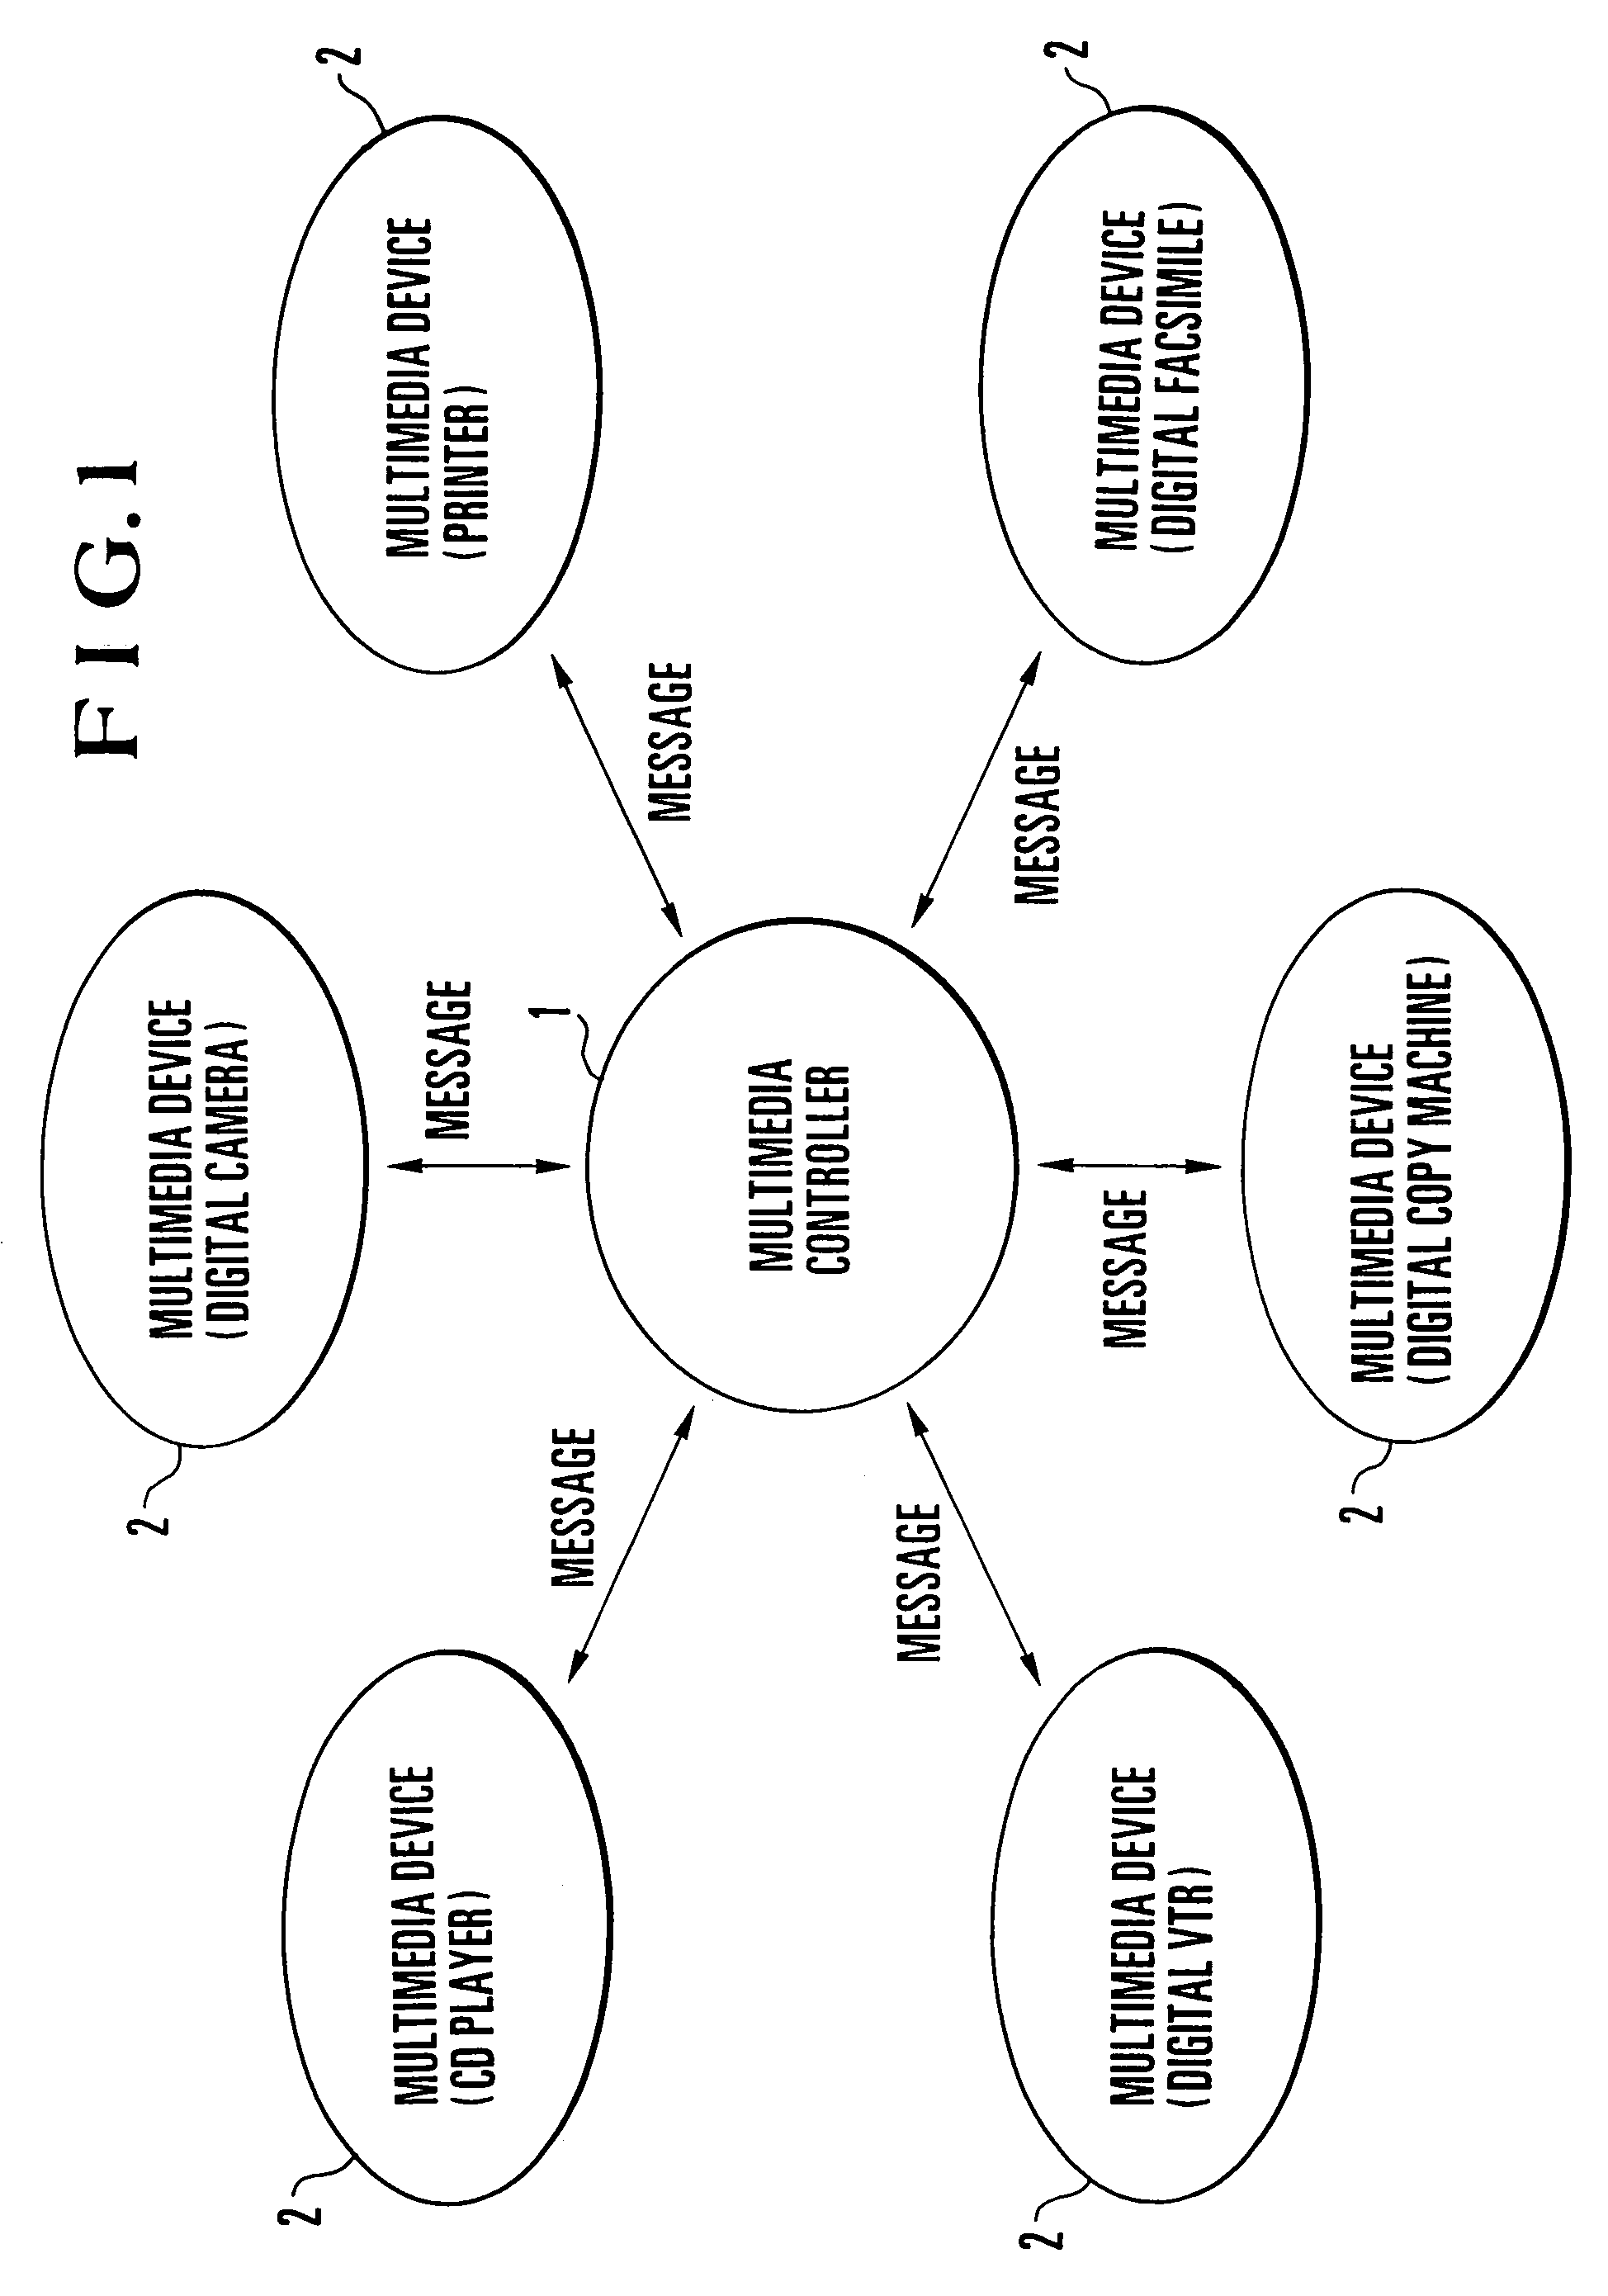 System for receiving description information from a network device and automatically generate a control panel at a controller for controlling the device